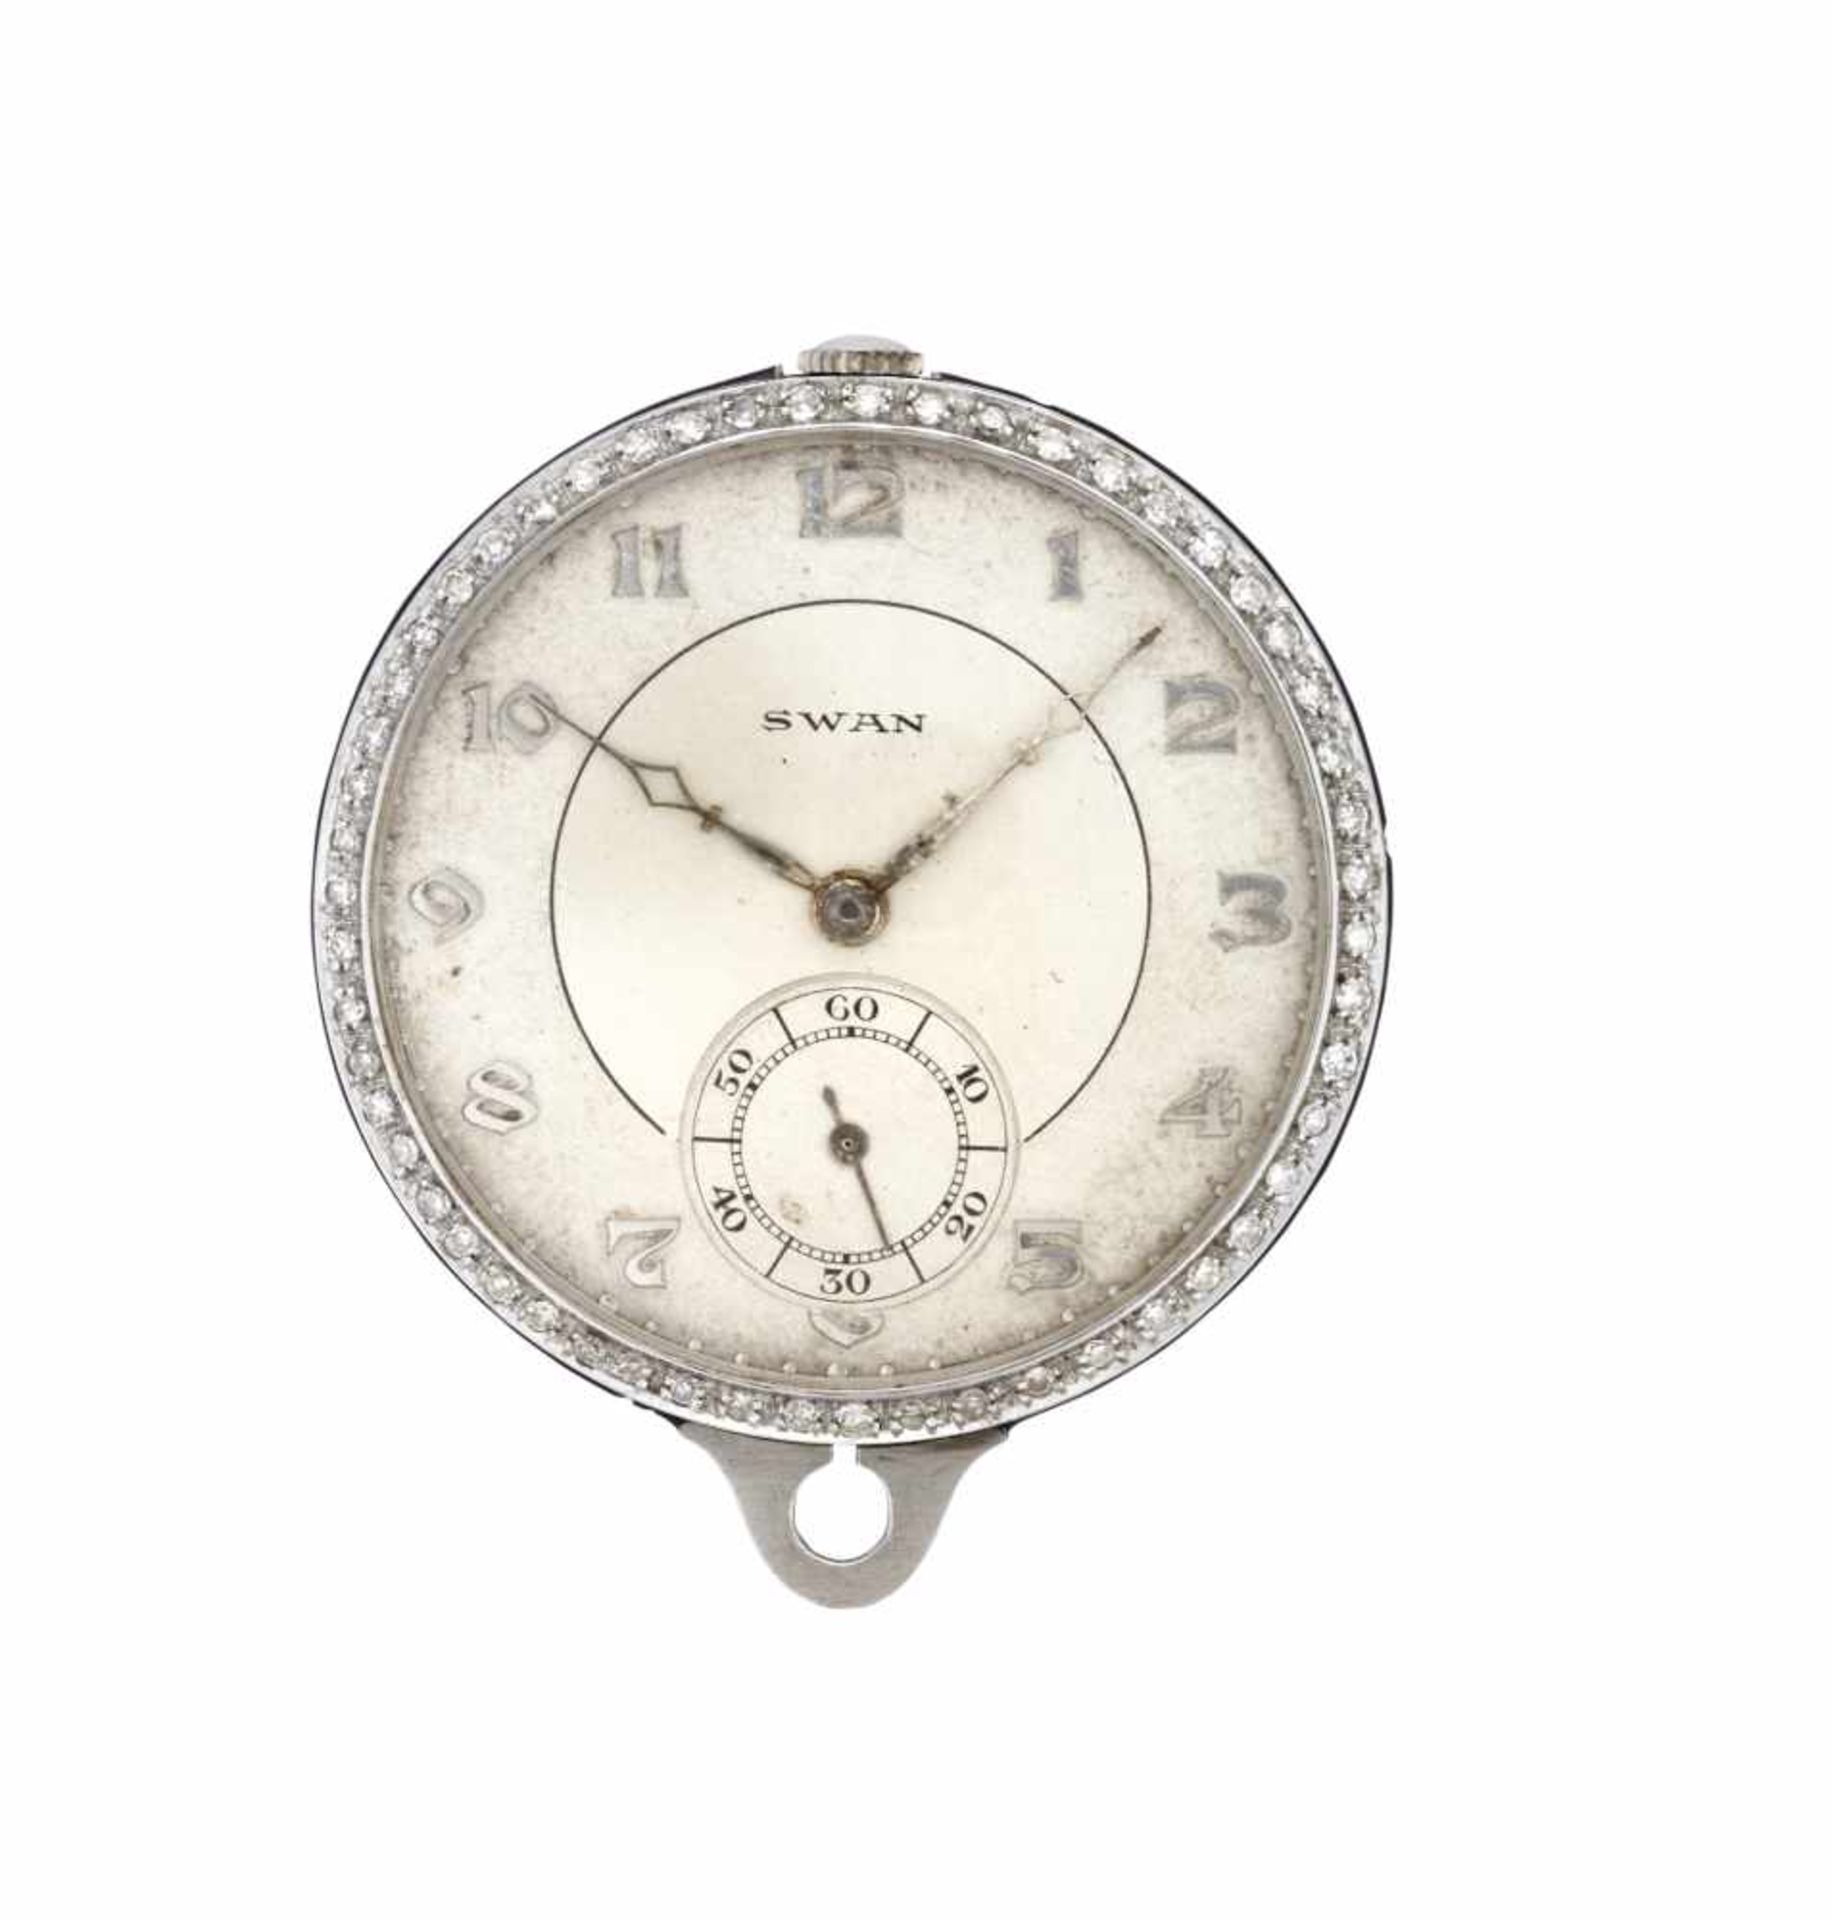 SWANPlatinum pocket watch with enamel decoration and diamondEarly 20th centuryDial and movement